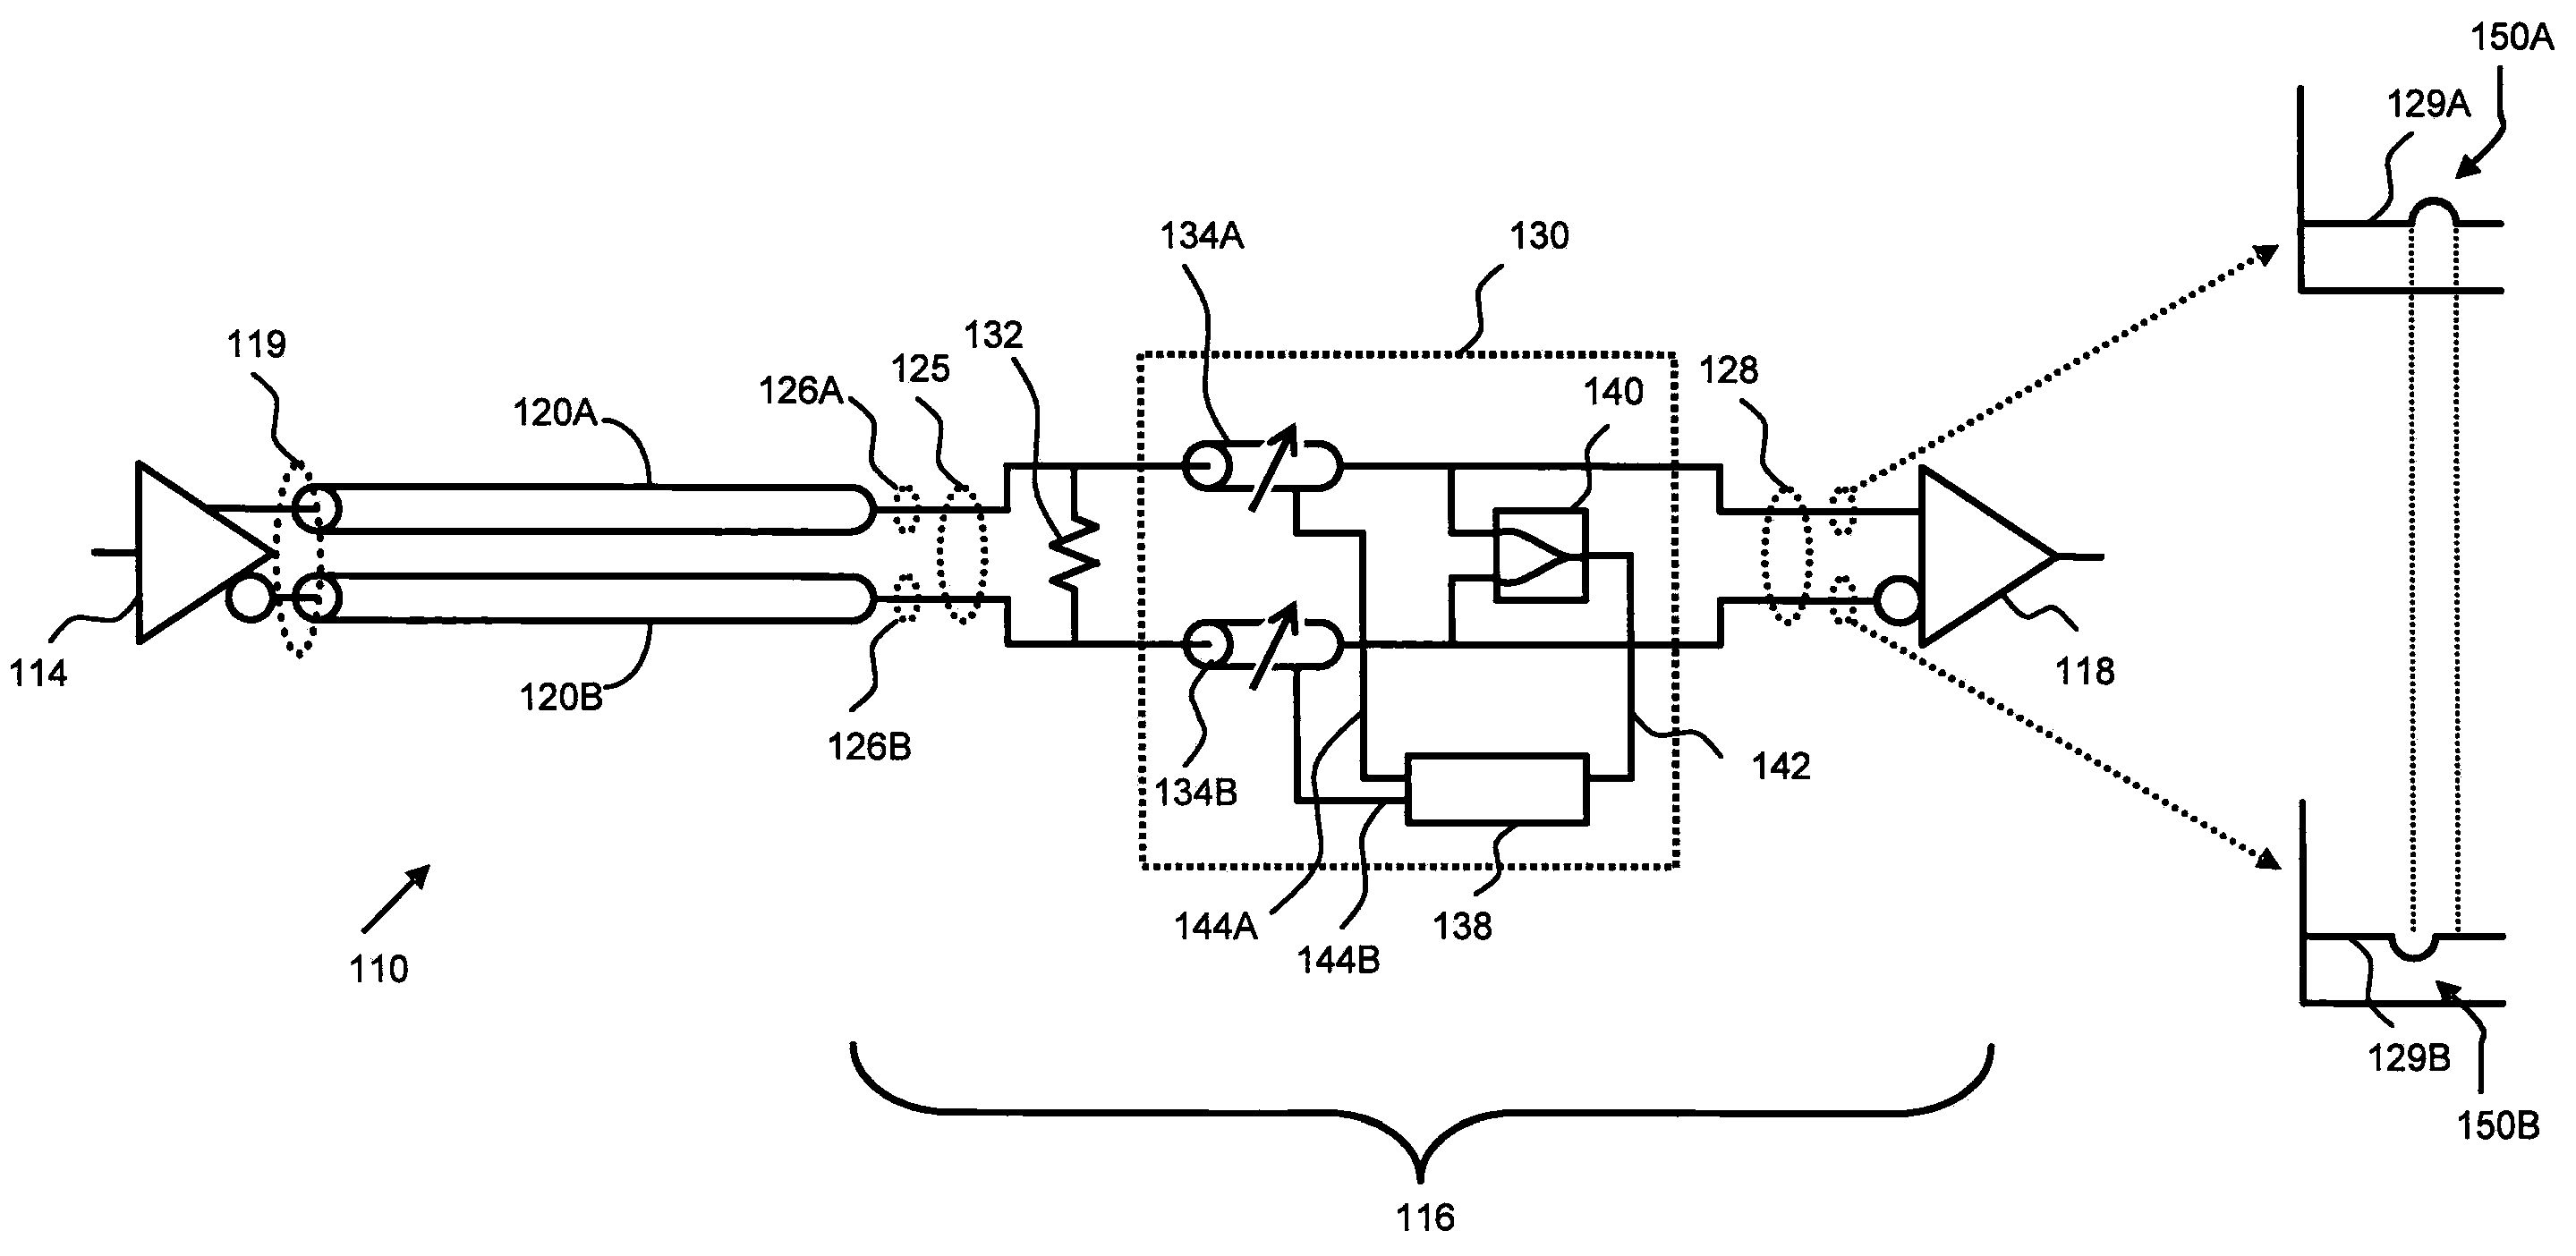 Differential communication link with skew compensation circuit